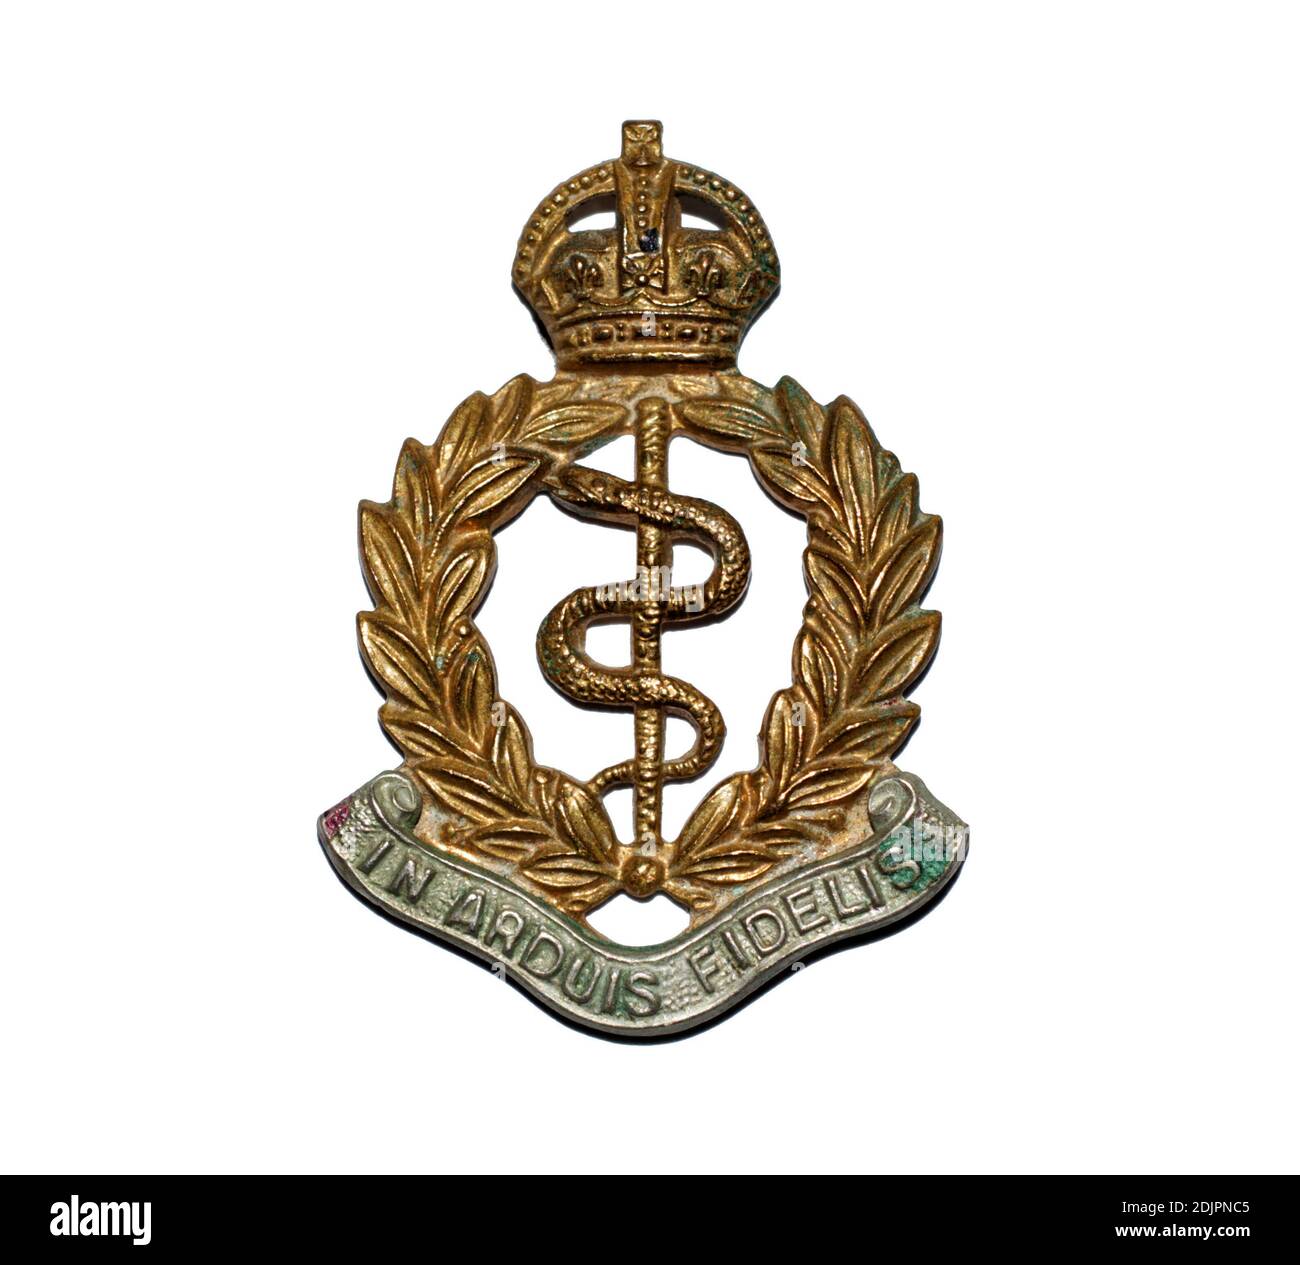 THE ROYAL ARMY MEDICAL CORPS MILITARY BADGE PILL BOX TABLET CHOICE SQUARE ROUND 